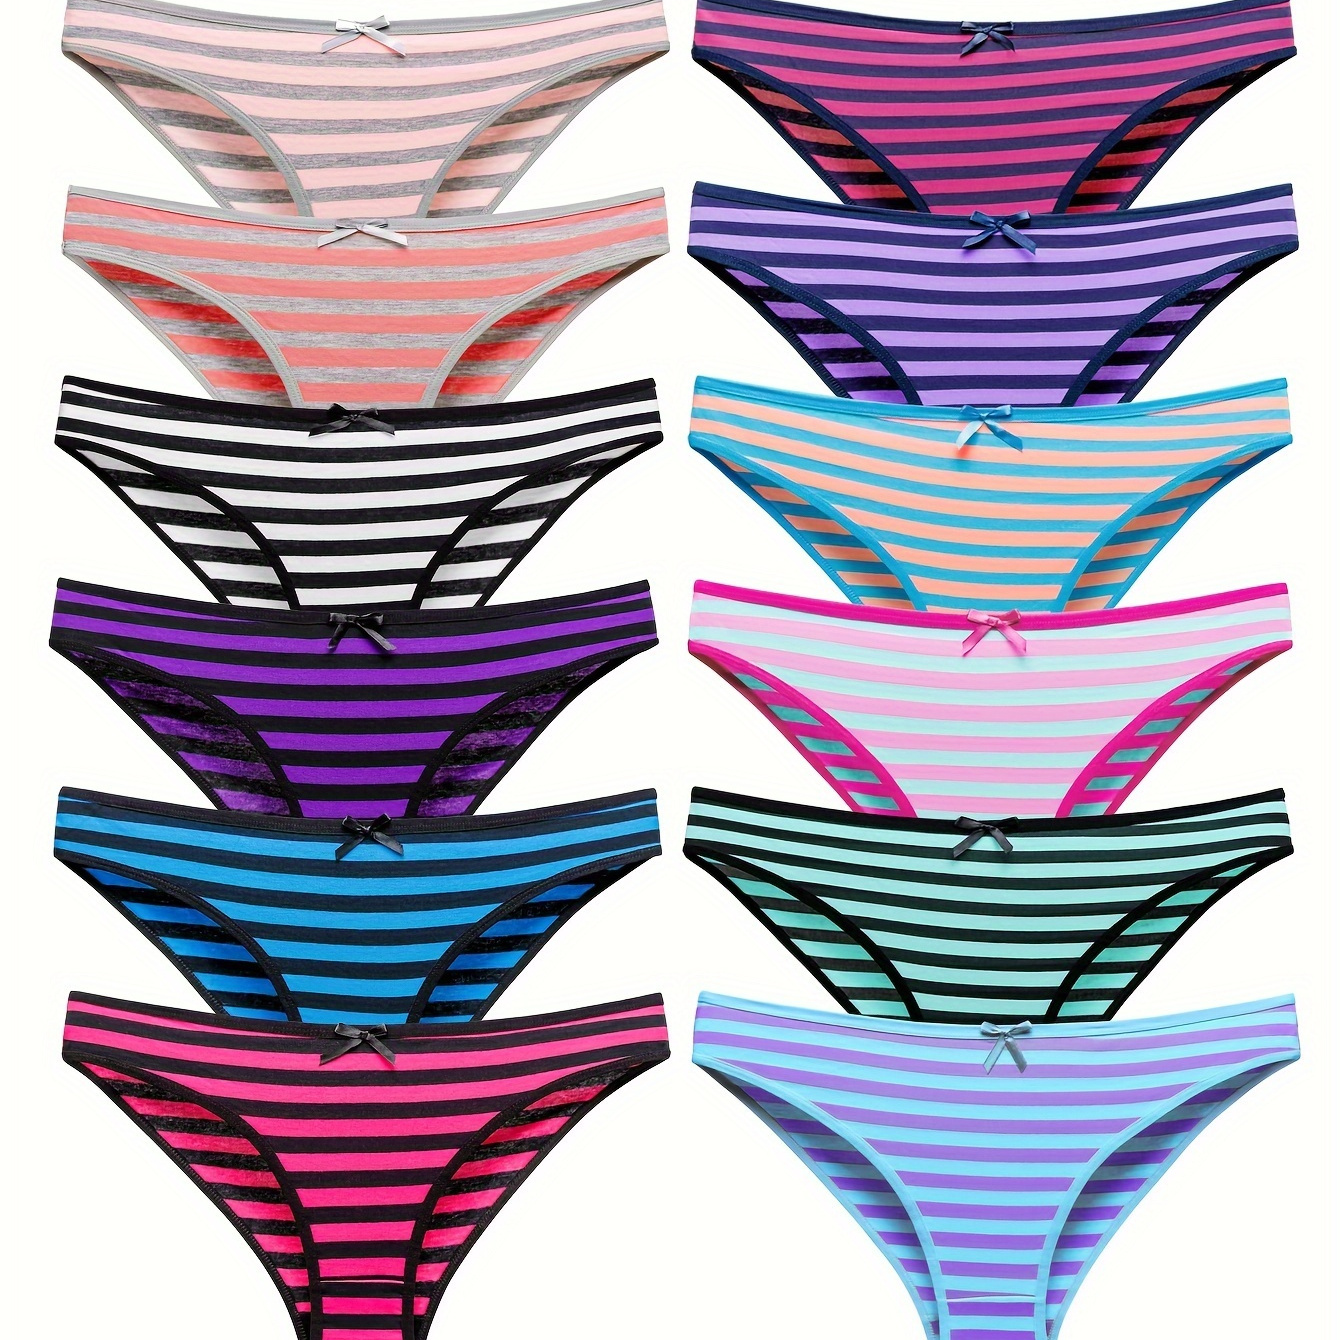 

12 Pcs Plus Size Comfy And Breathable Striped Bow Tie Briefs For Women - Stretchy Intimates Panties For Ultimate Comfort And Style